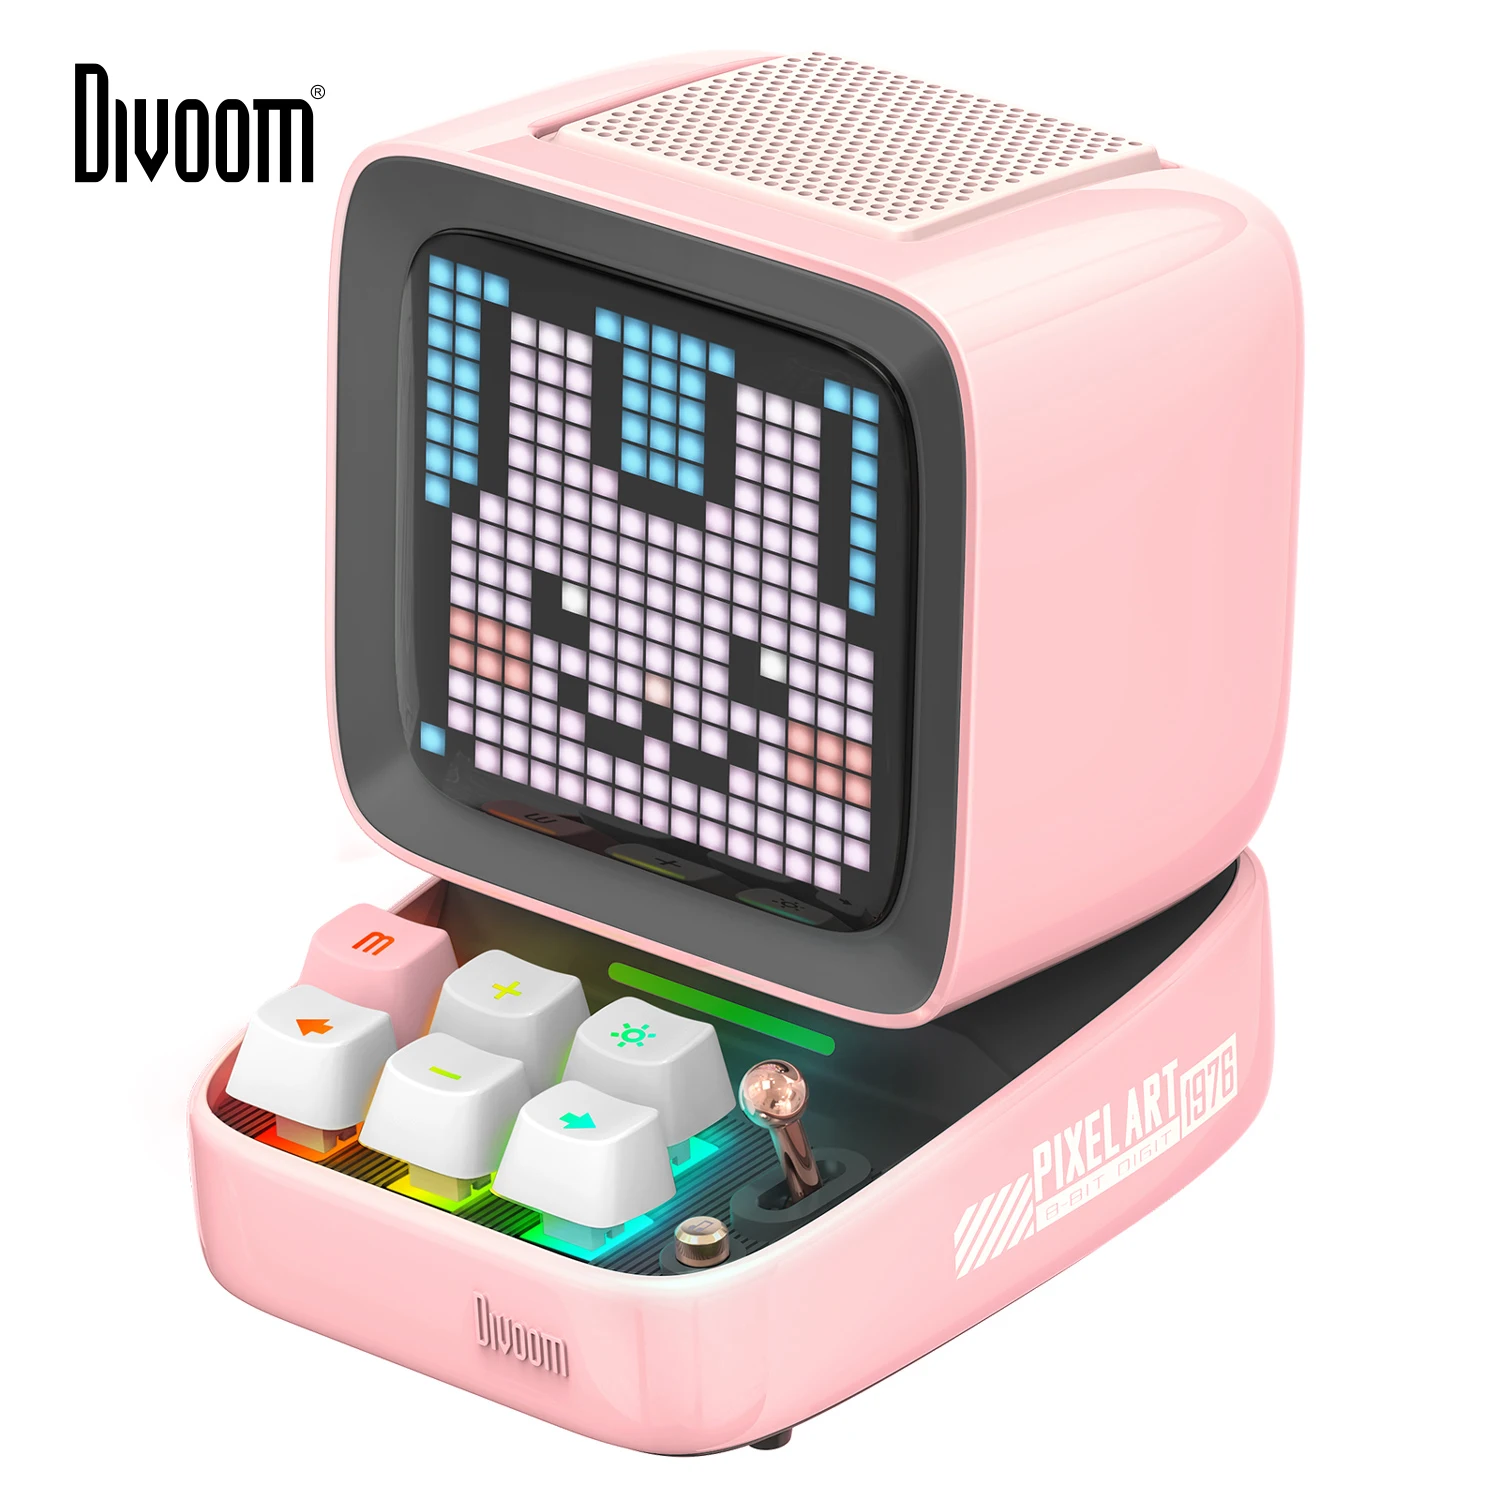 Buy Divoom Ditoo-Pro from AliExpress for $77